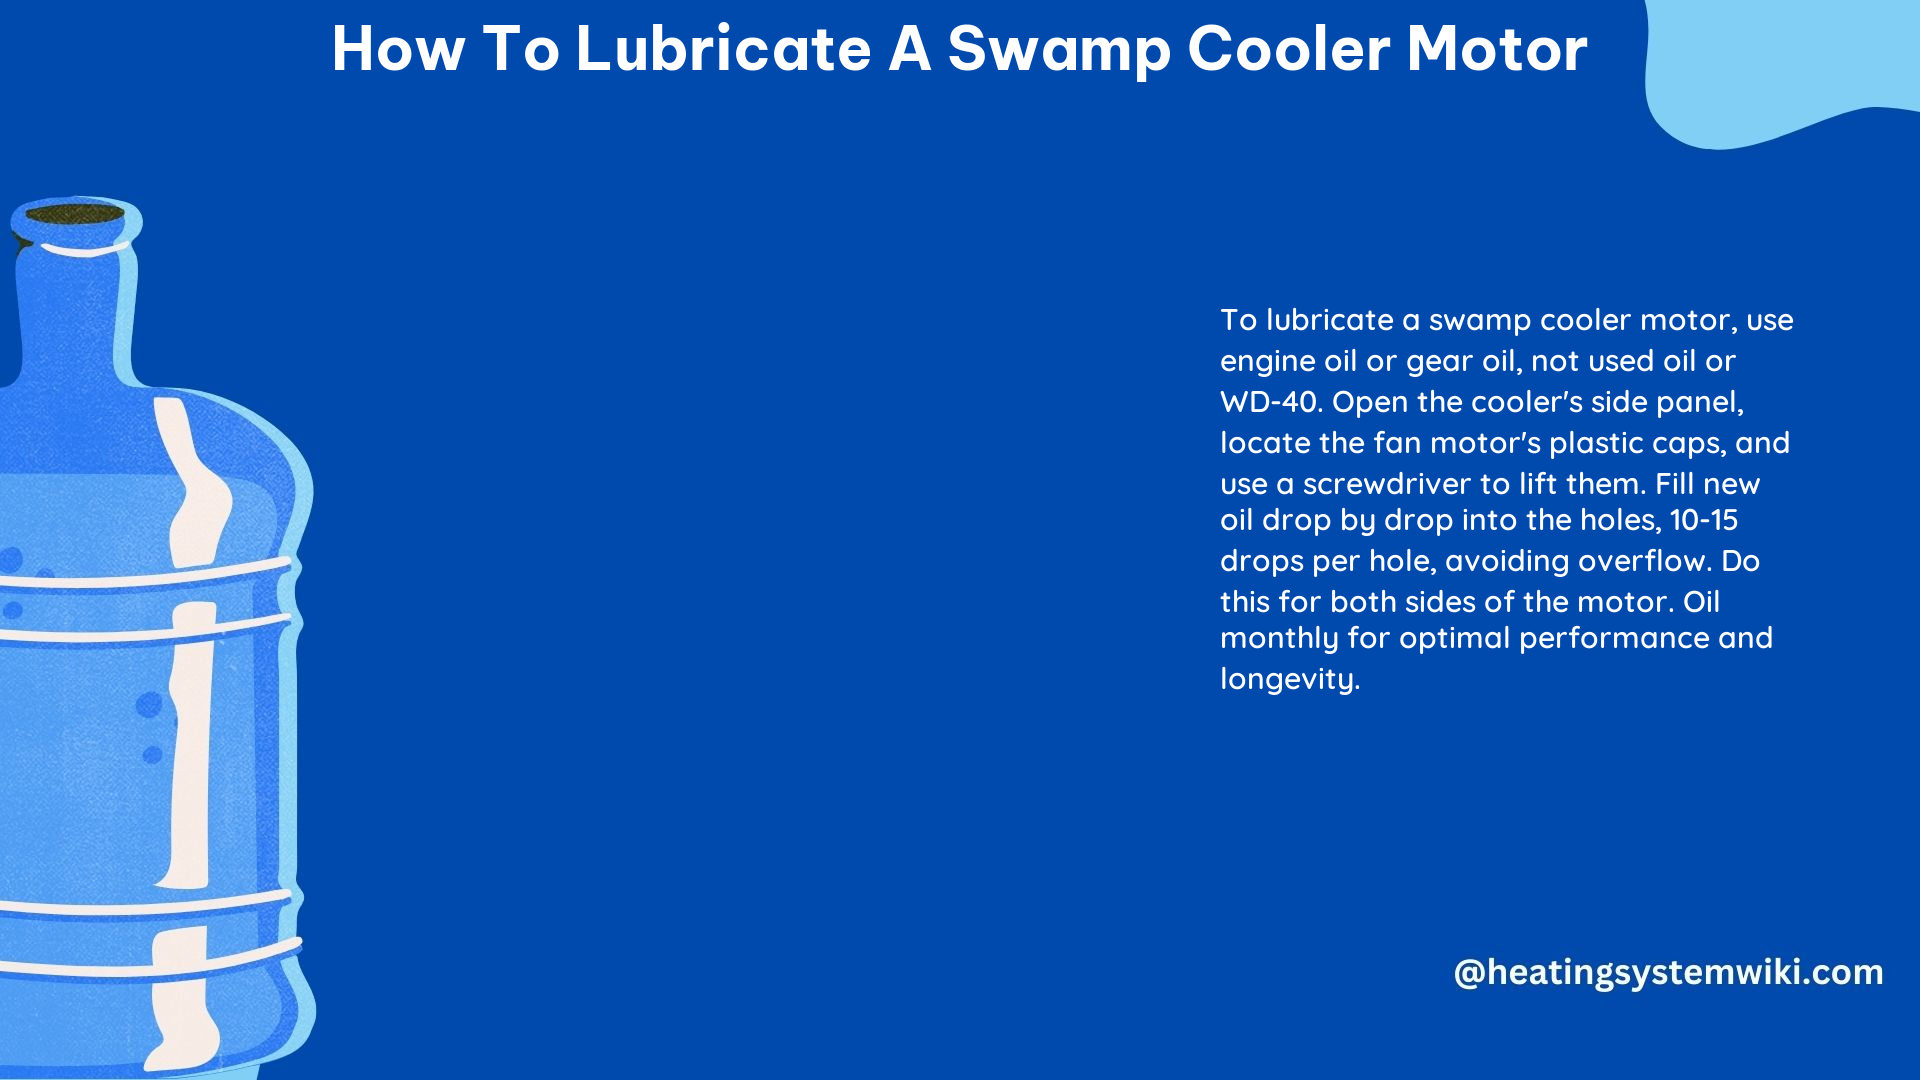 How to Lubricate a Swamp Cooler Motor